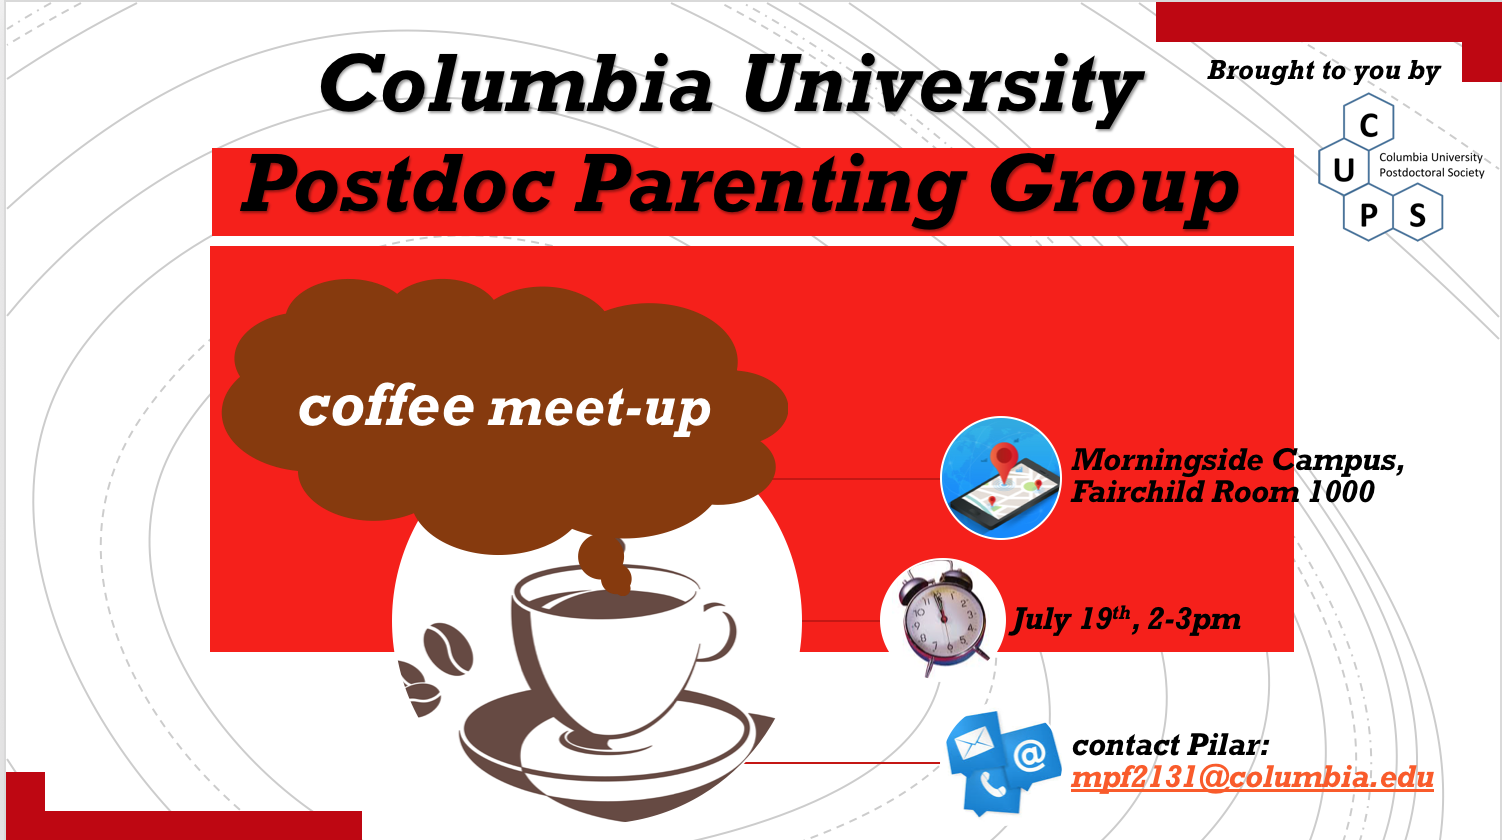 postdoc-parenting-group-meet-up-coffee-time-Morningside-july